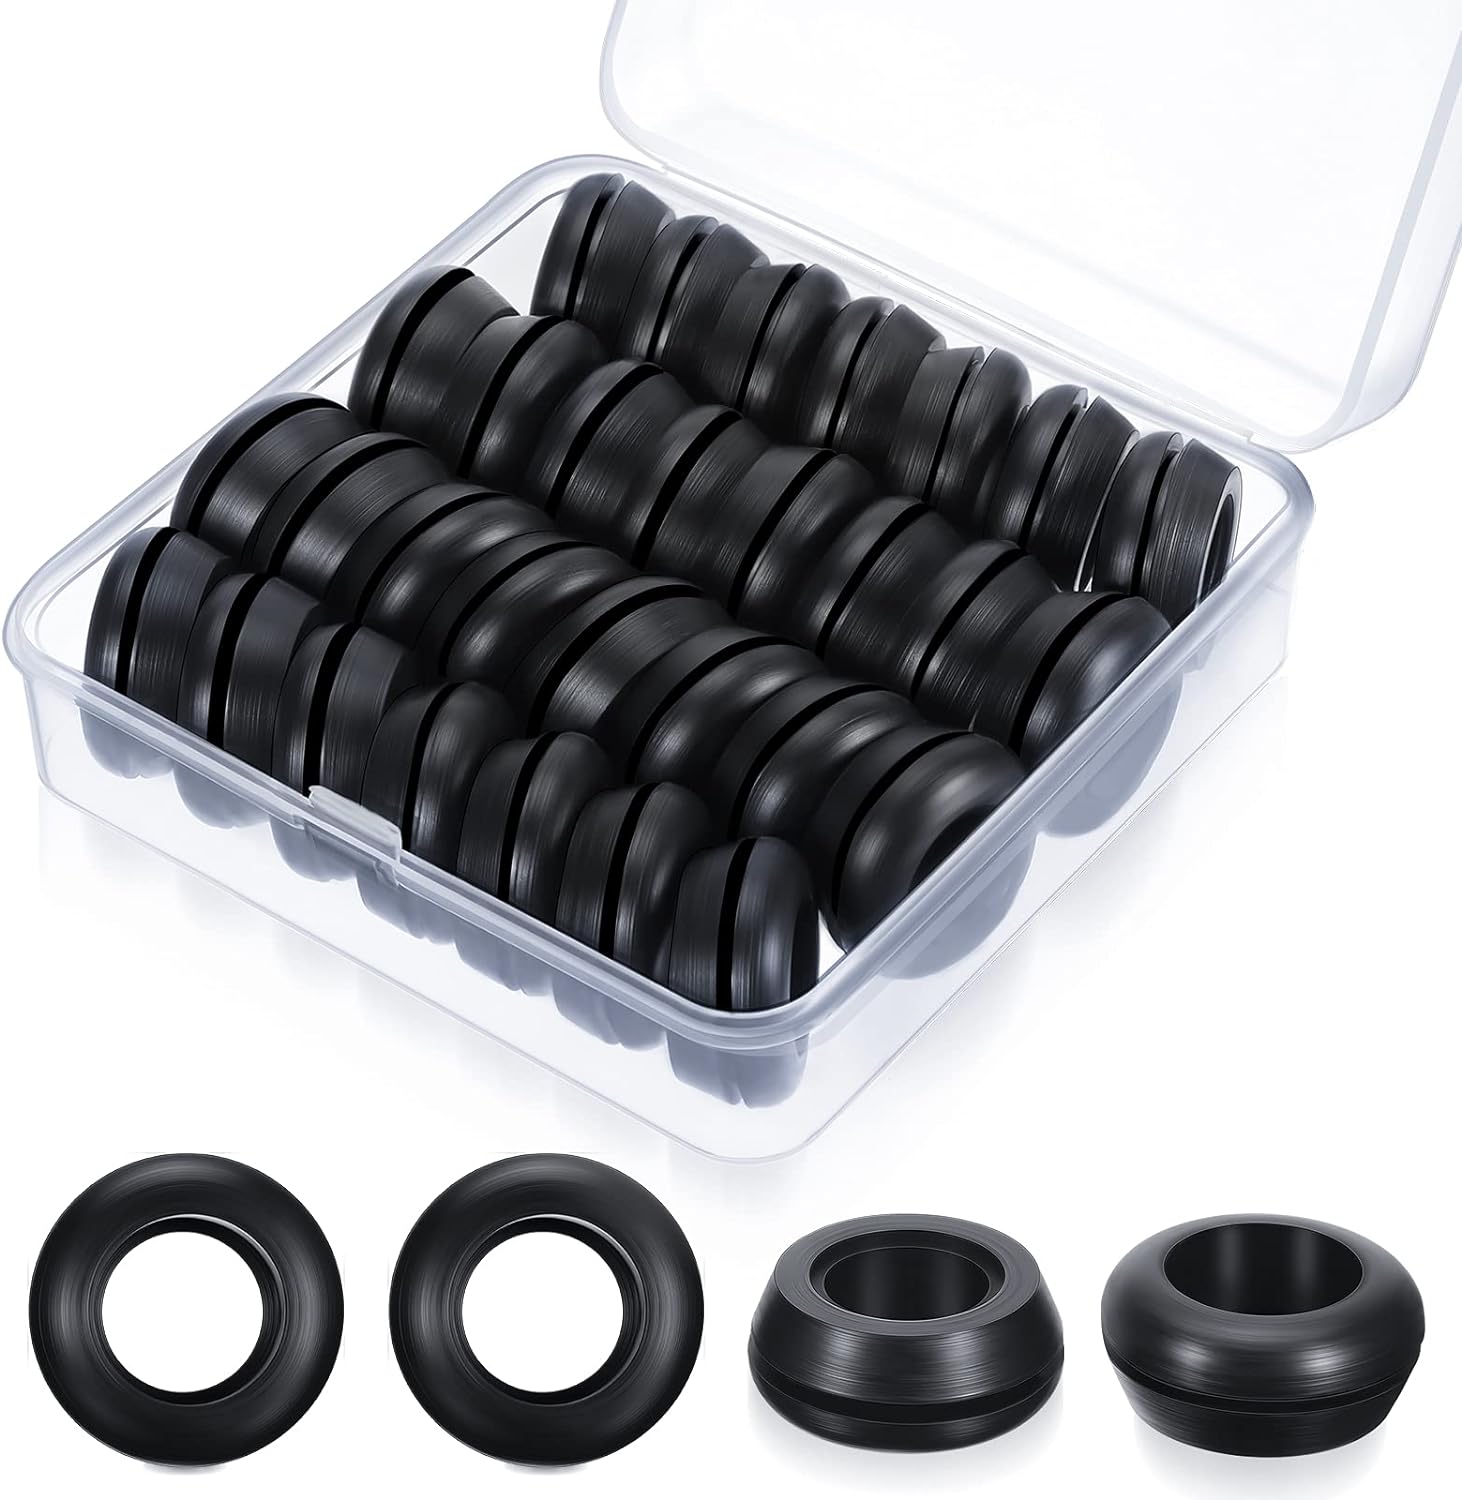 Outus 30 Pack Rubber Grommet with Storage Box, Waterproof Rubber Grommet Kit Rubber Gasket Hole Plug for Flow Hydroponic System, Rubb